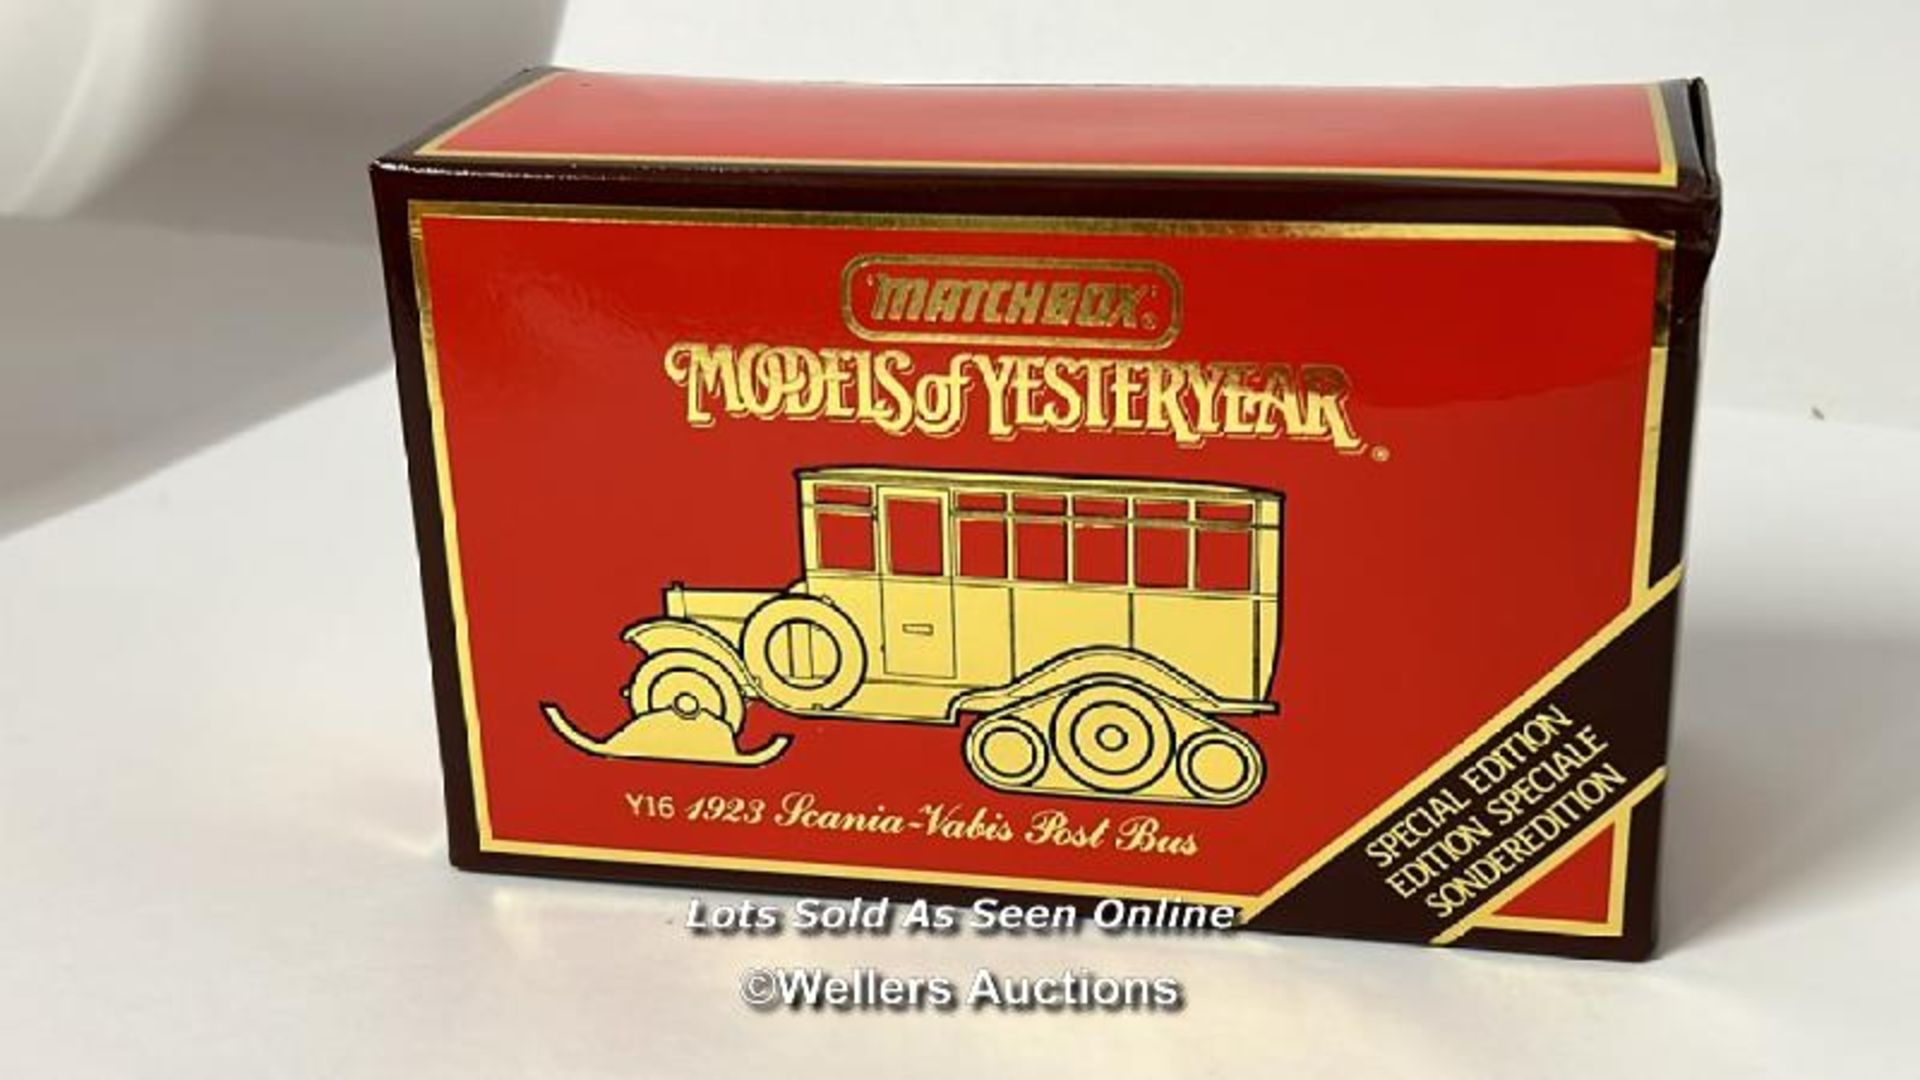 Matchbox Models of Yesteryear 1923 Scania-Vabis Post Bus Y16, rare yellow variant, limited edition - Image 3 of 5